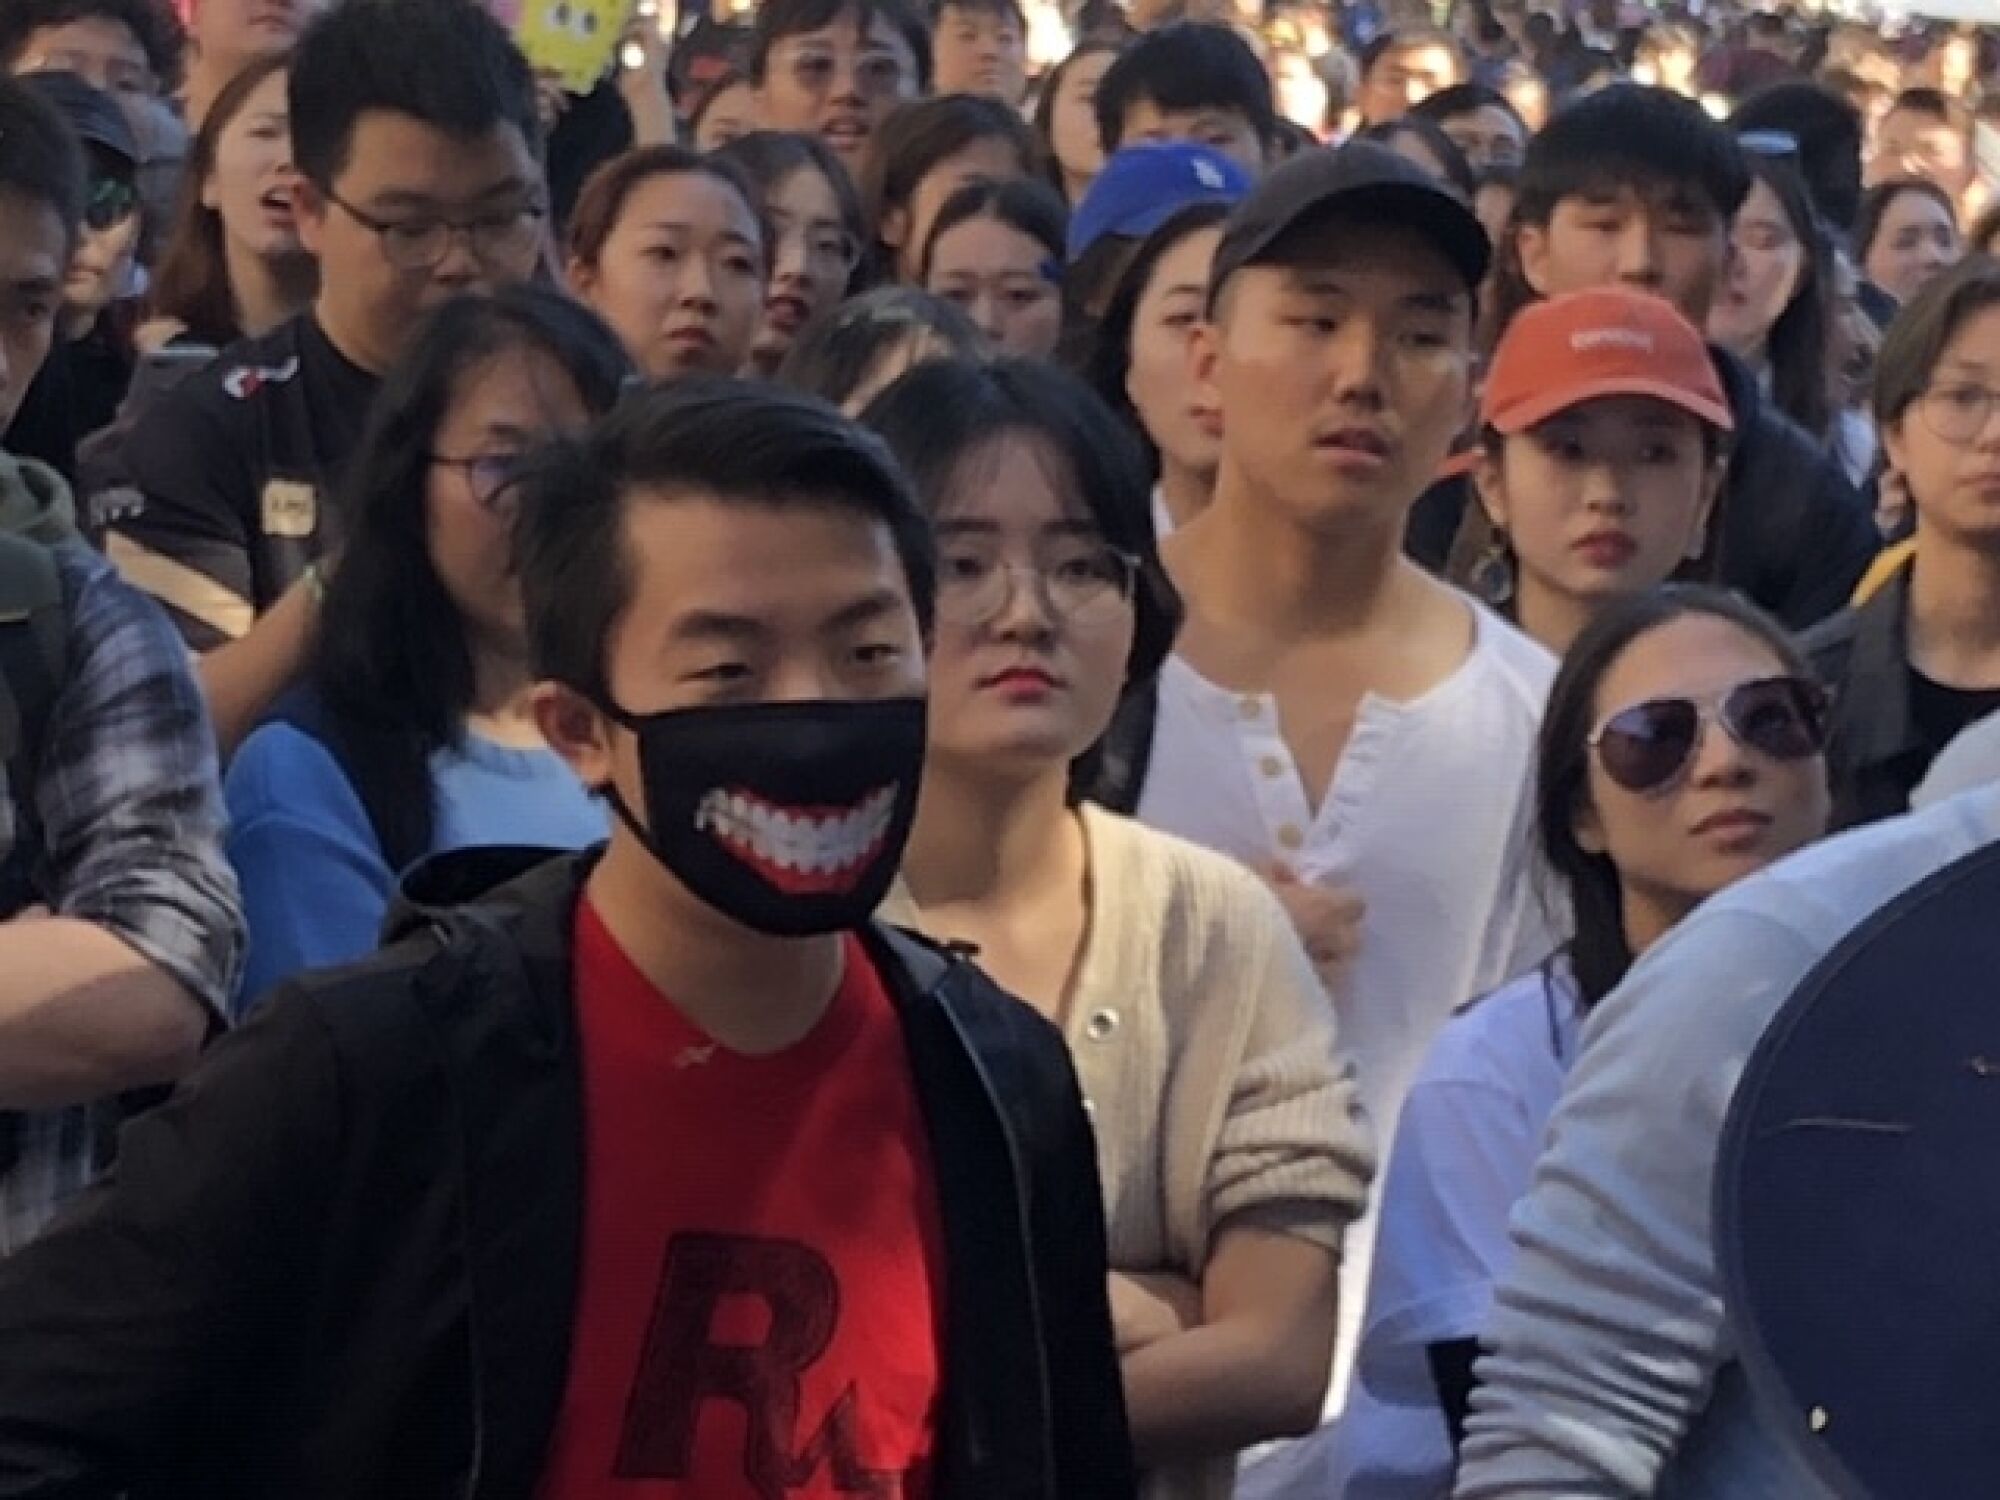 Pro-Beijing students gathered at the University of Queensland on July 24, 2019.